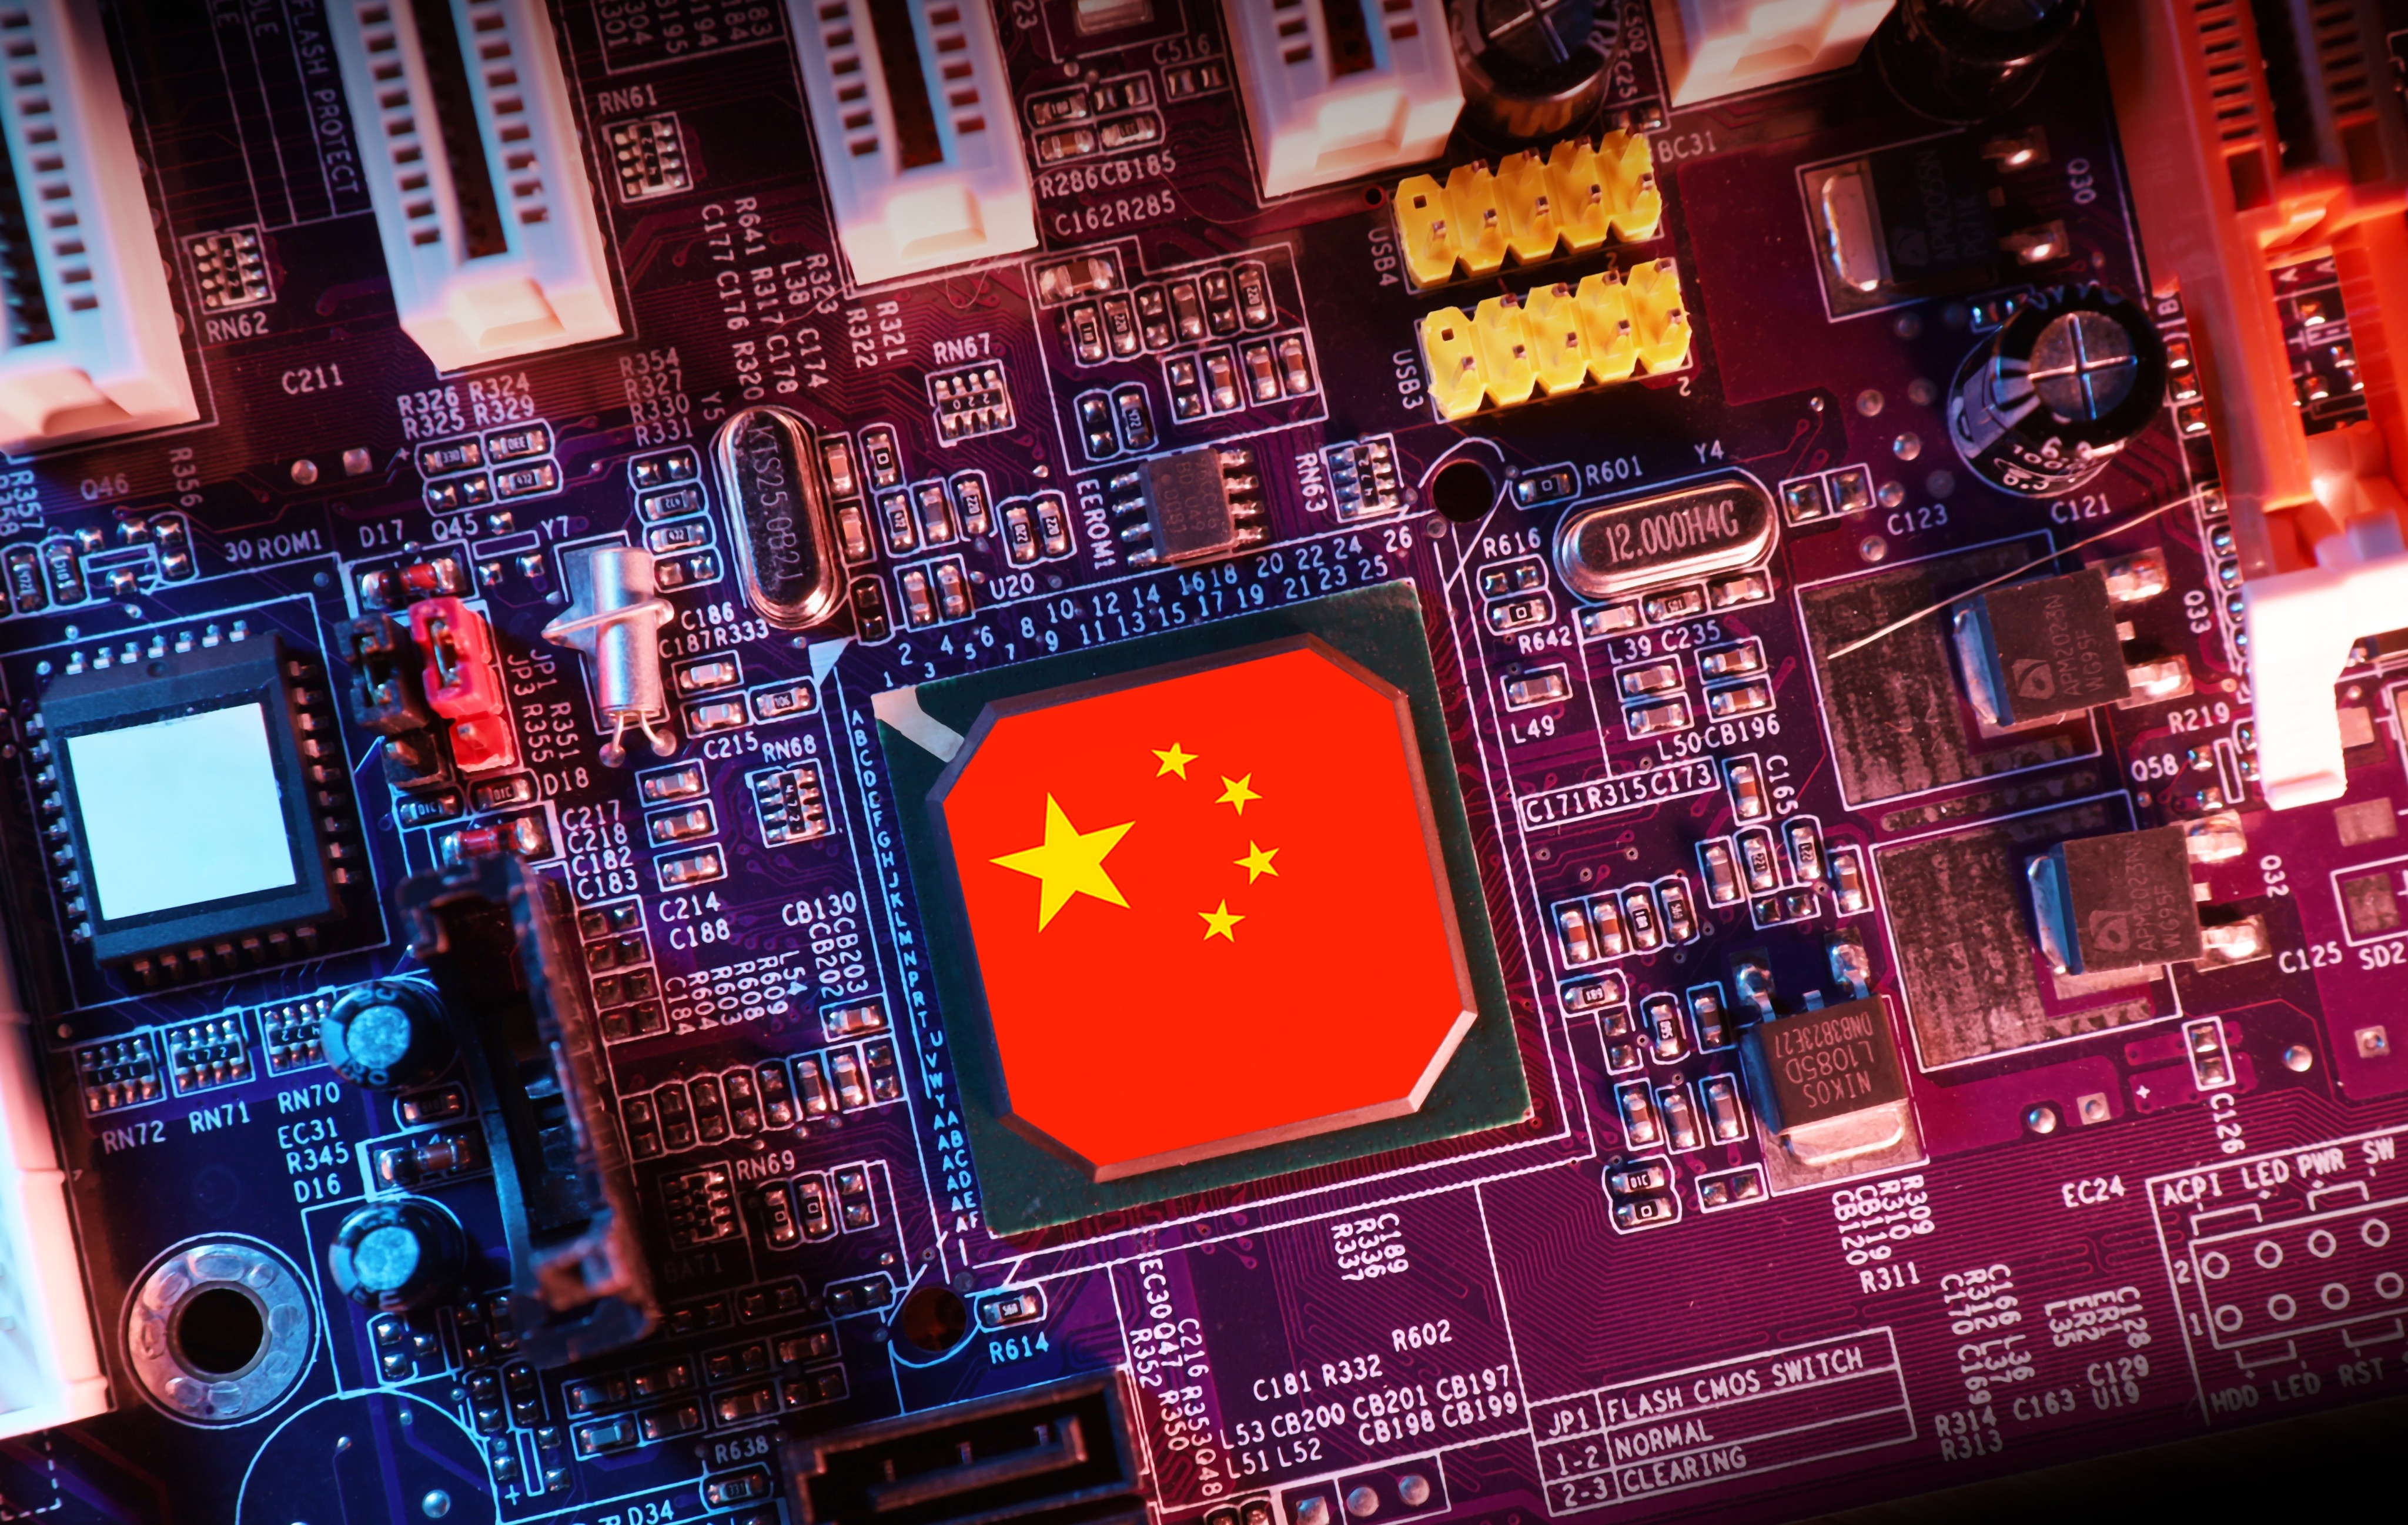 At an industry conference, the head of one of China’s largest semiconductor equipment firms, Advanced Micro-Fabrication Equipment Inc China (AMEC), told a crowd that US export restrictions revealed its intent to keep China’s chip industry five generations behind the cutting edge. Photo: Shutterstock